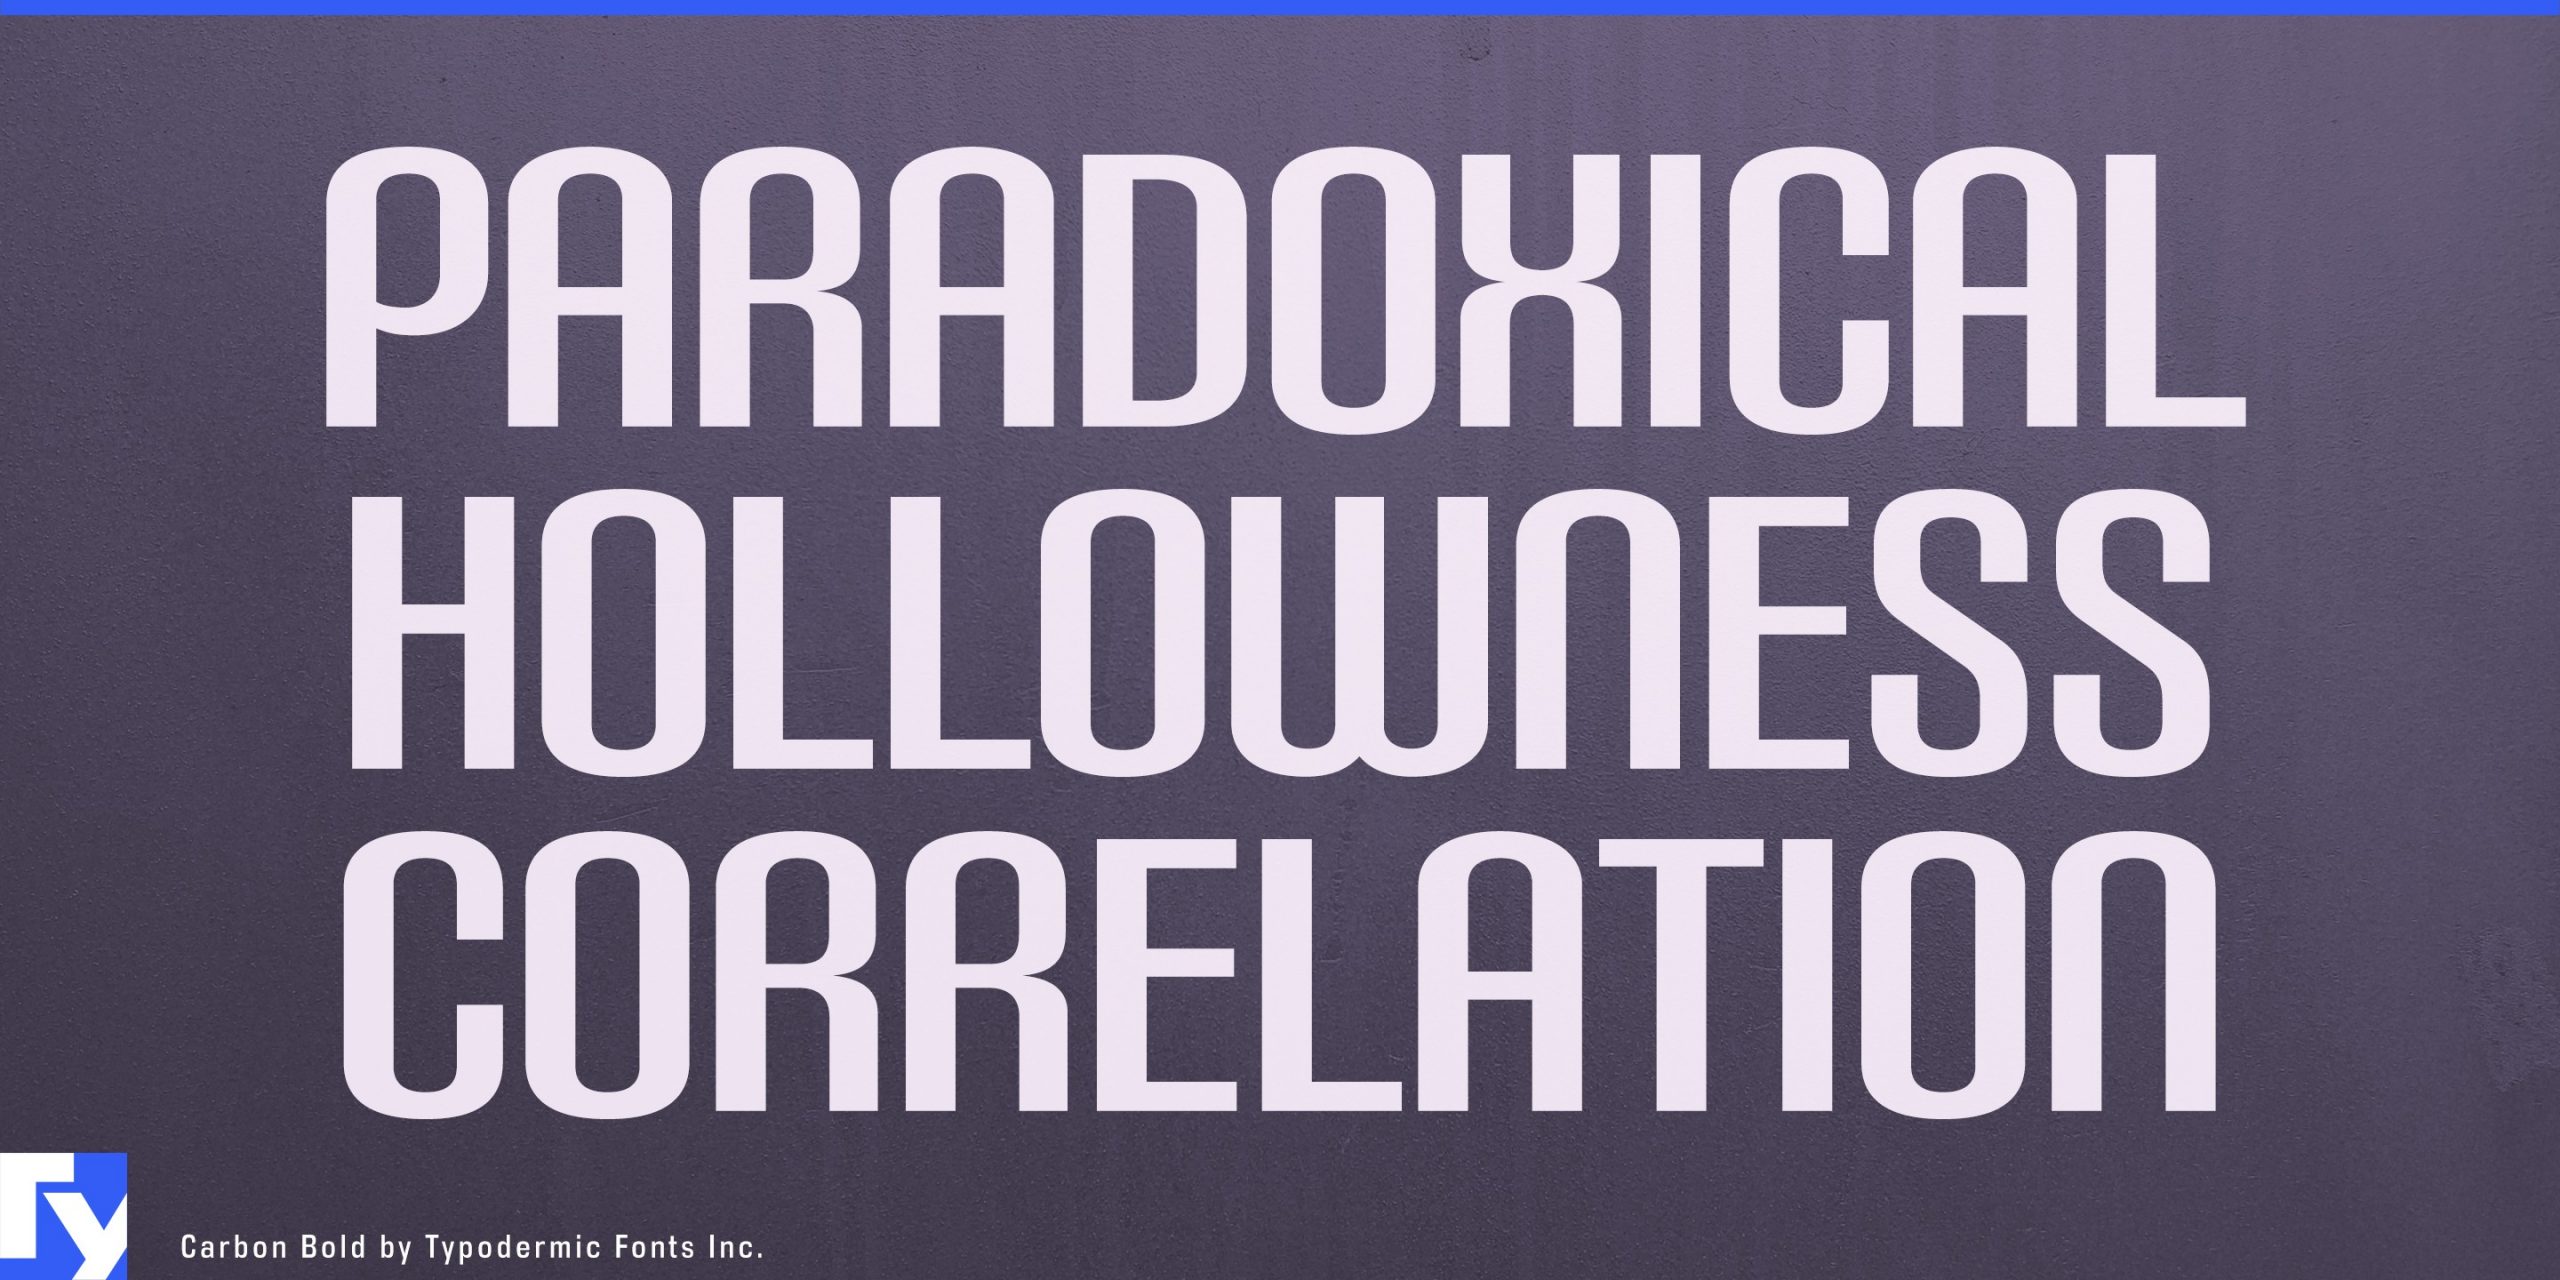 The Brutalist Unicase: Carbon Typeface Makes a Statement